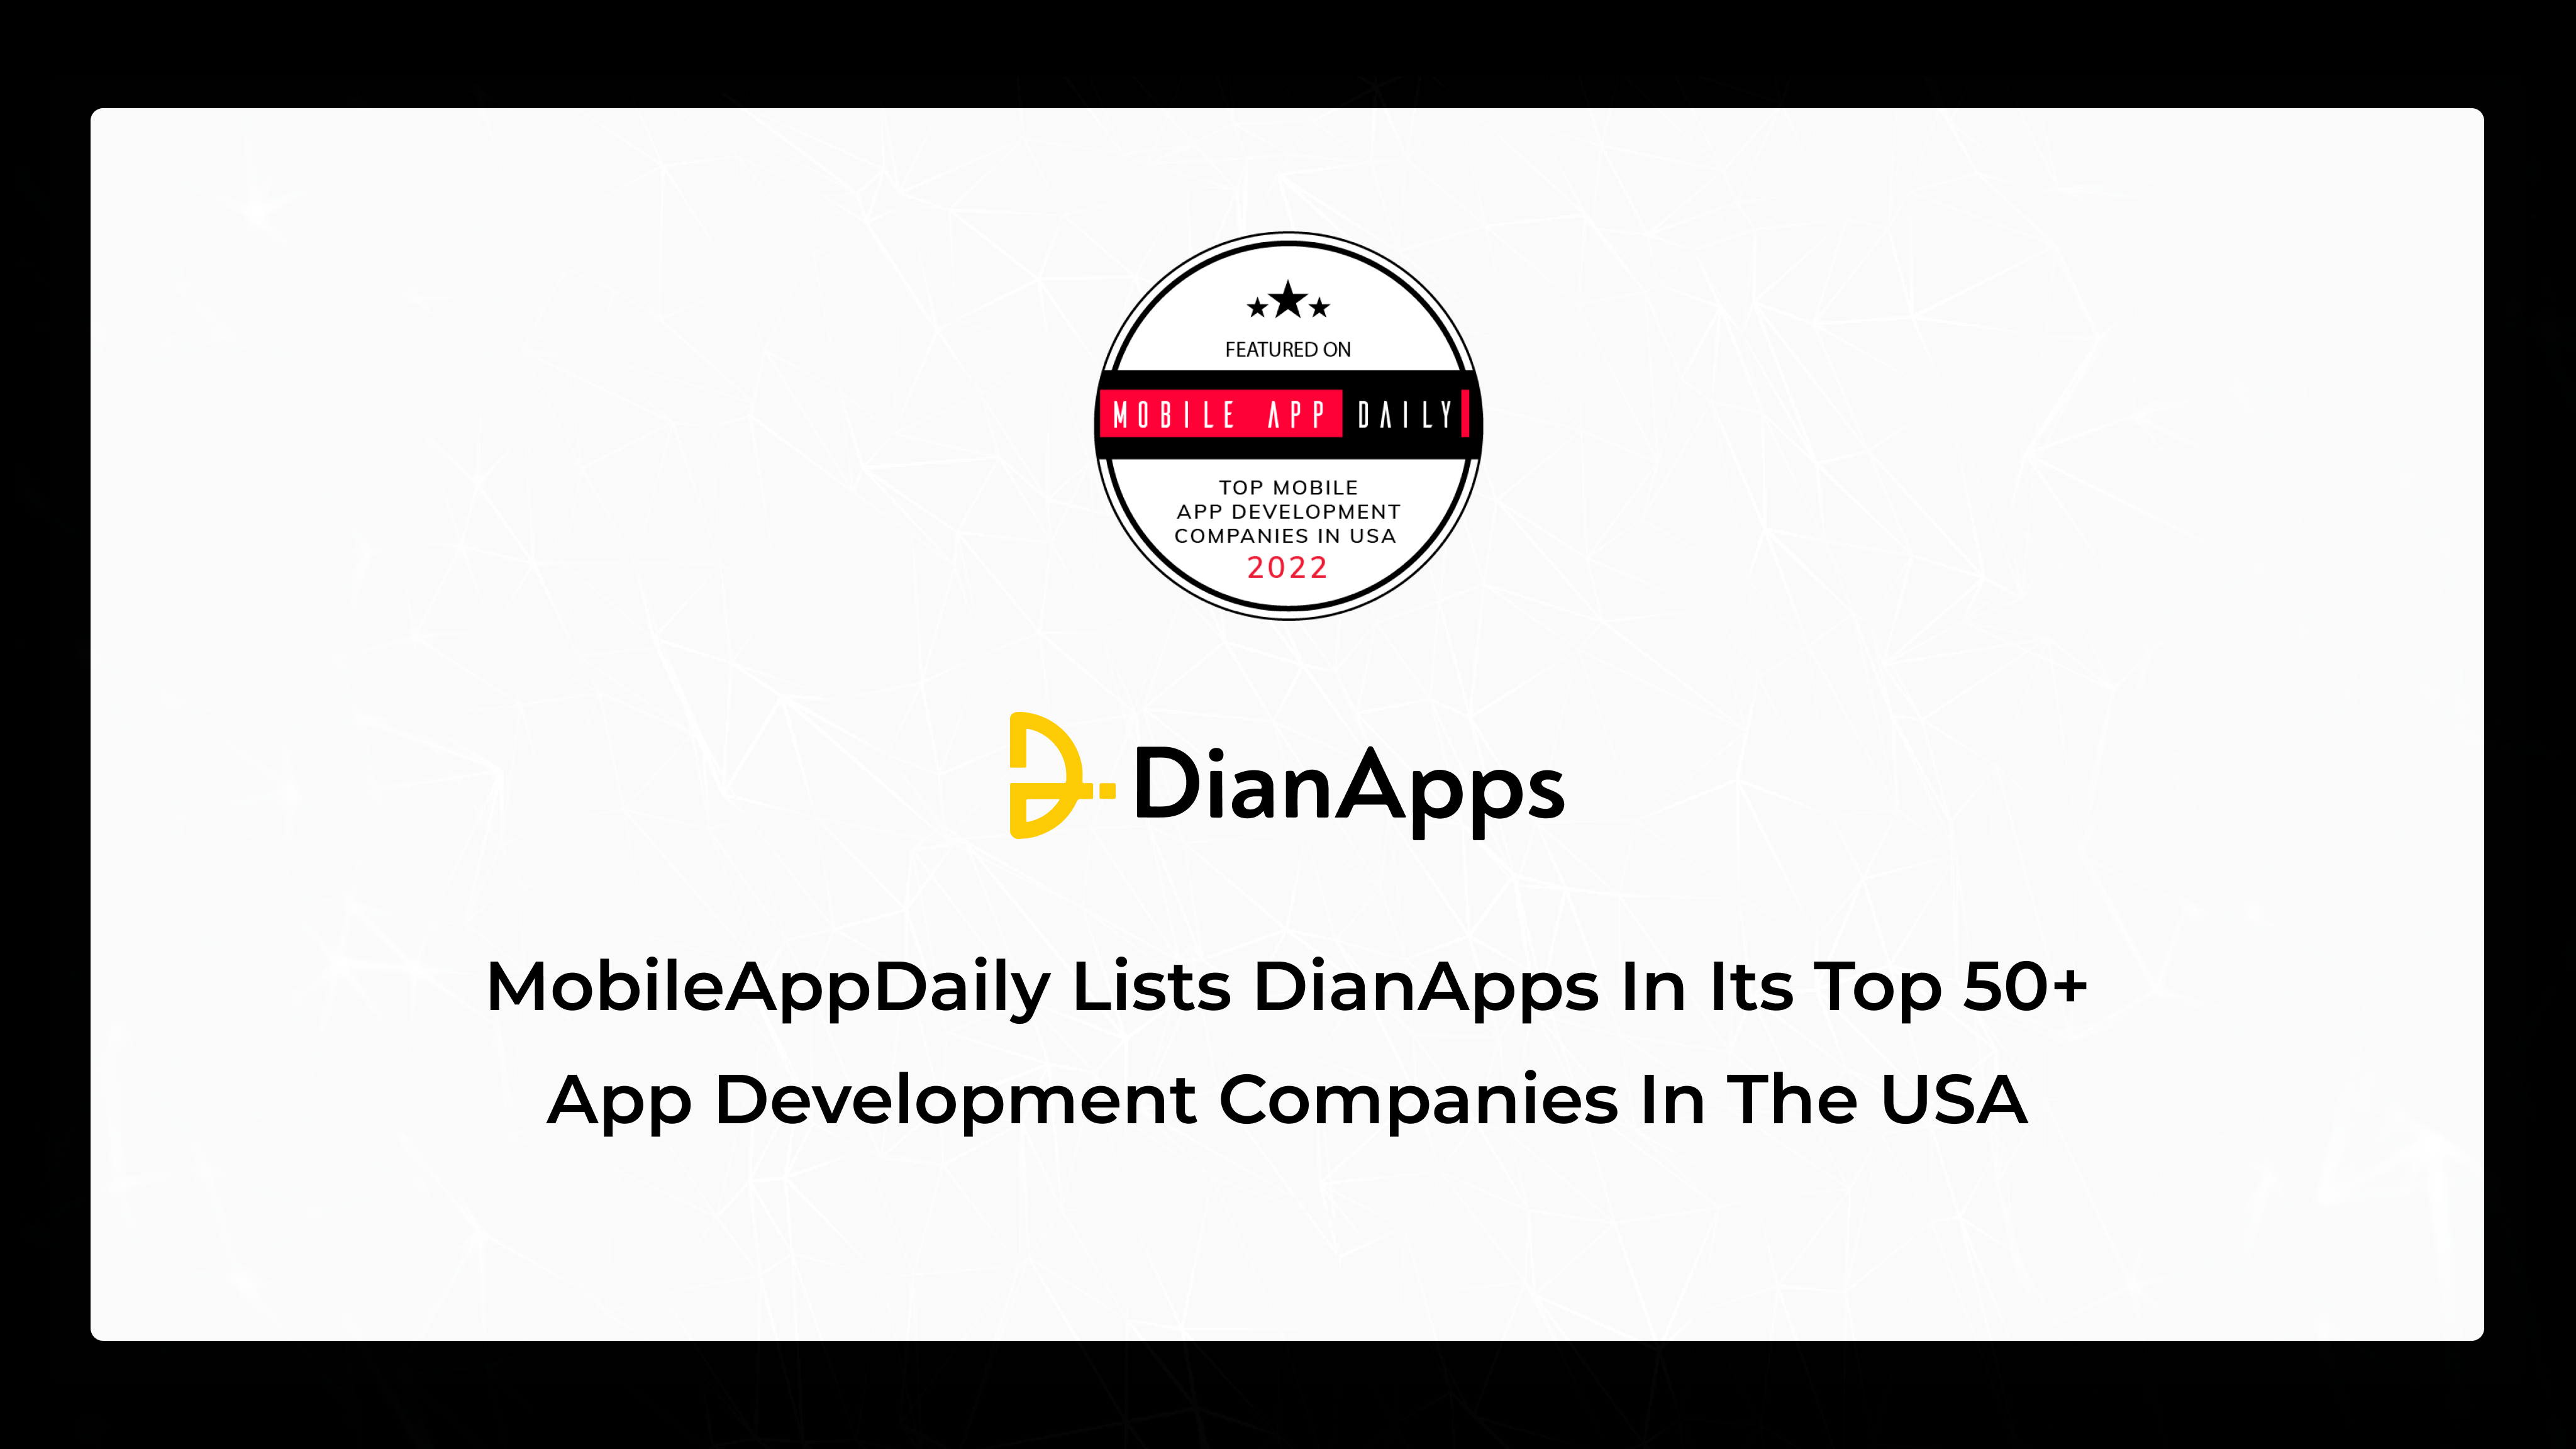 MobileAppDaily Lists Dian Apps in its Top 50+ App Development Companies in the USA